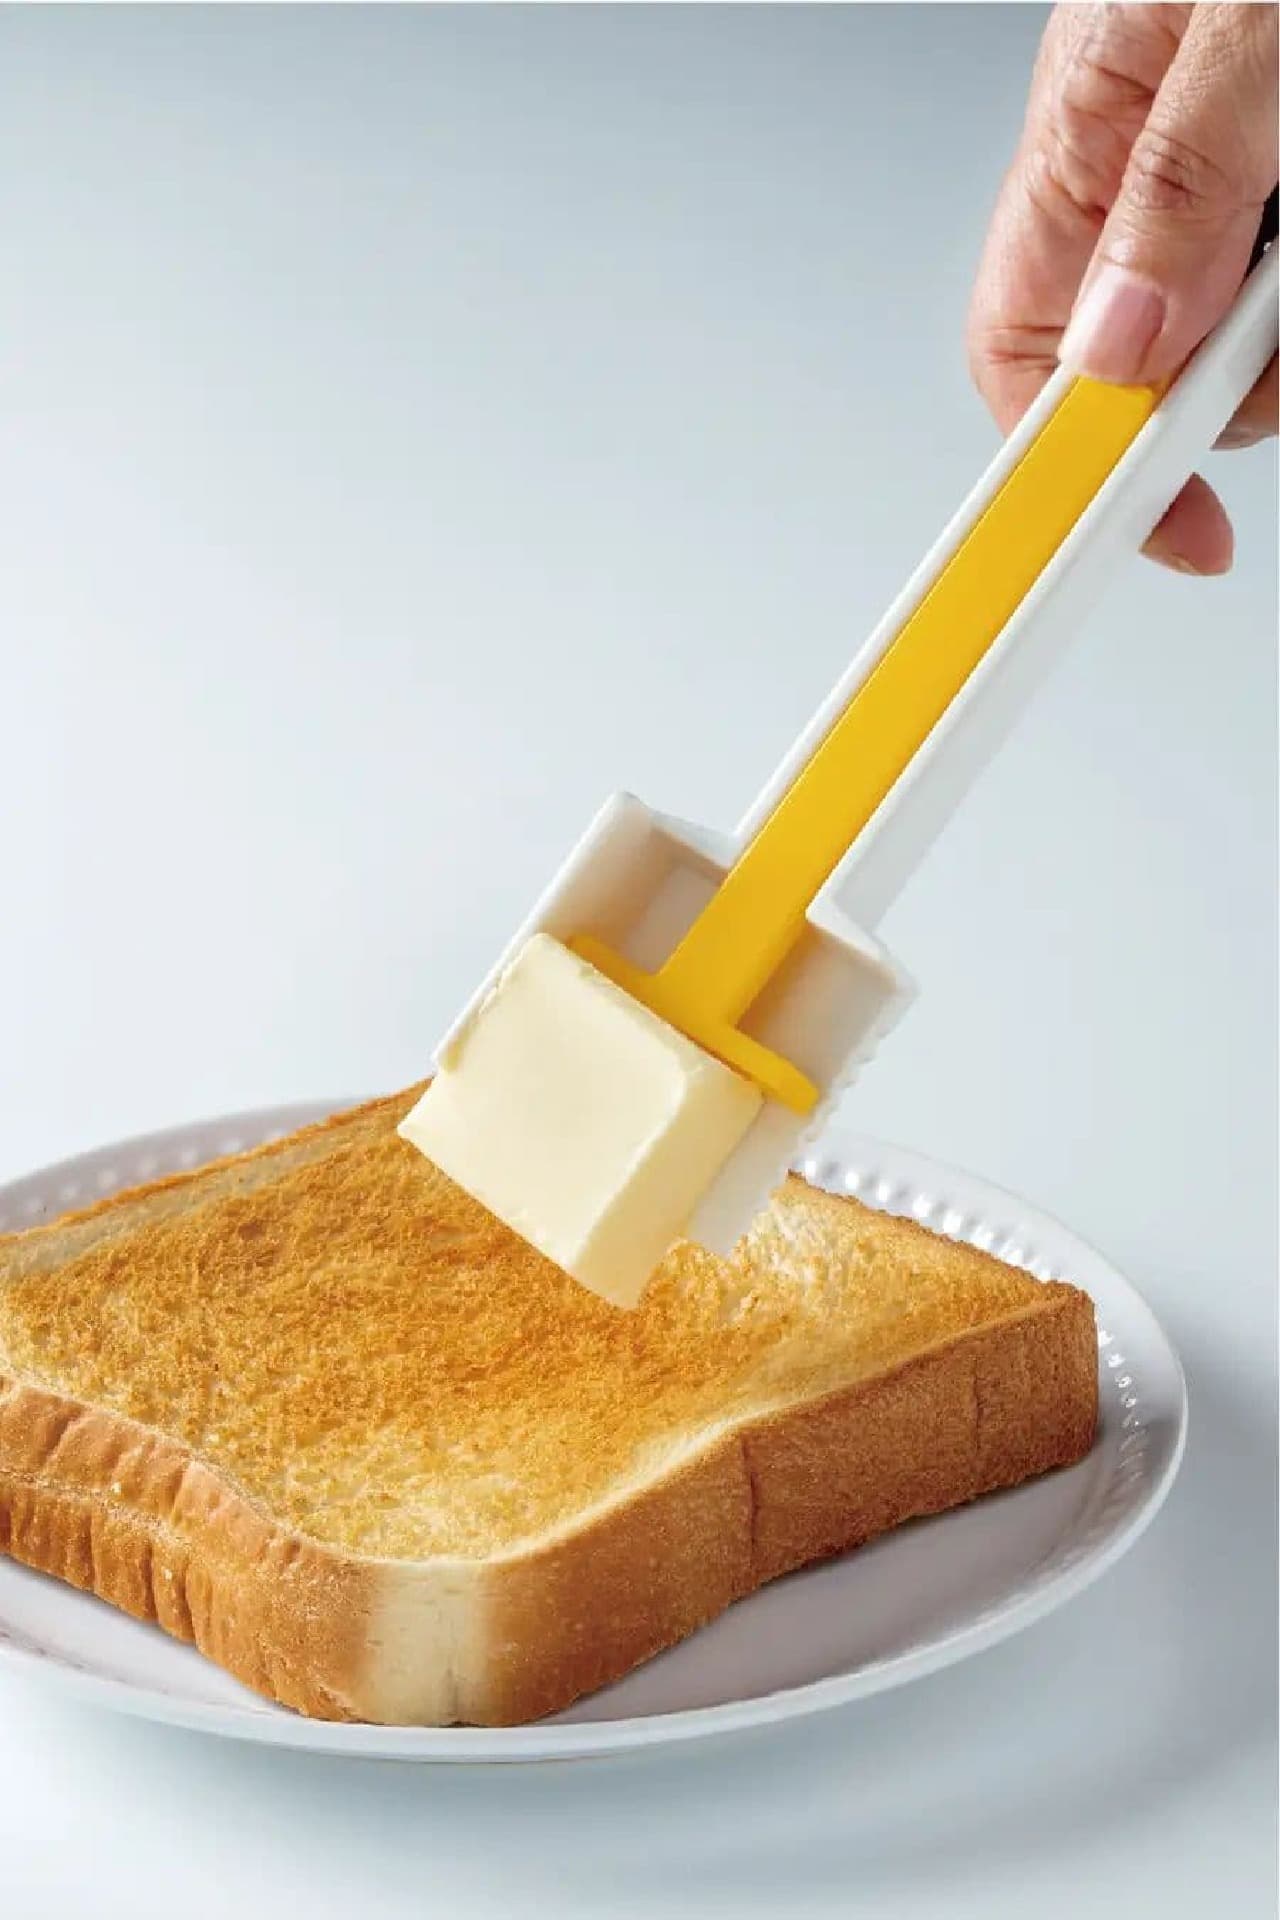 Skater "Butter cutter with butter removal function"